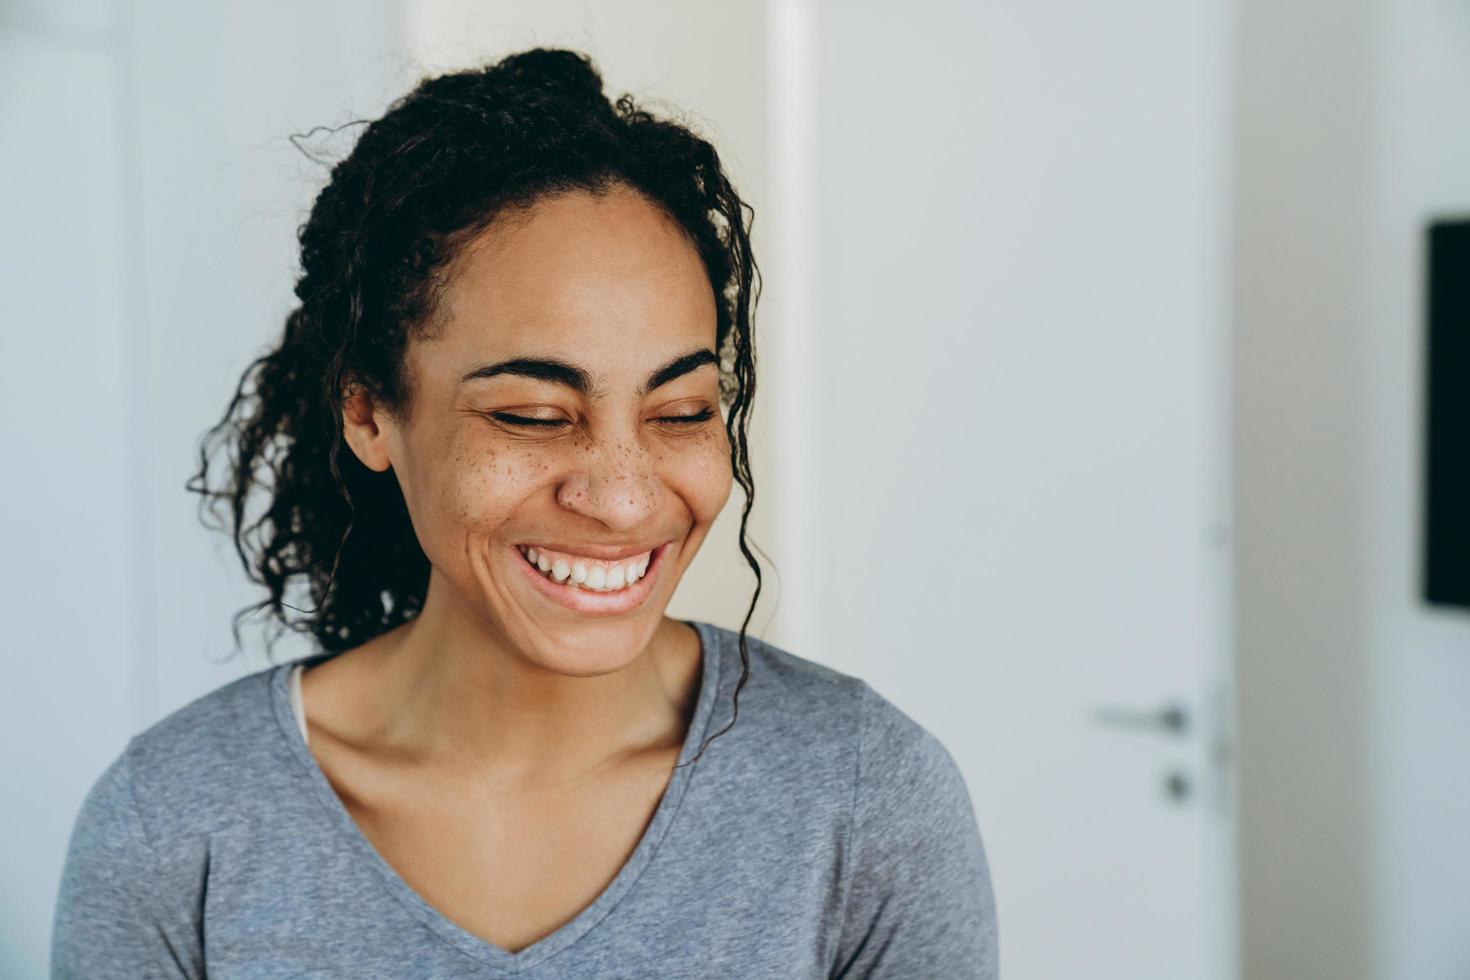 Black woman laughing with eyes closed during spending time at home photo